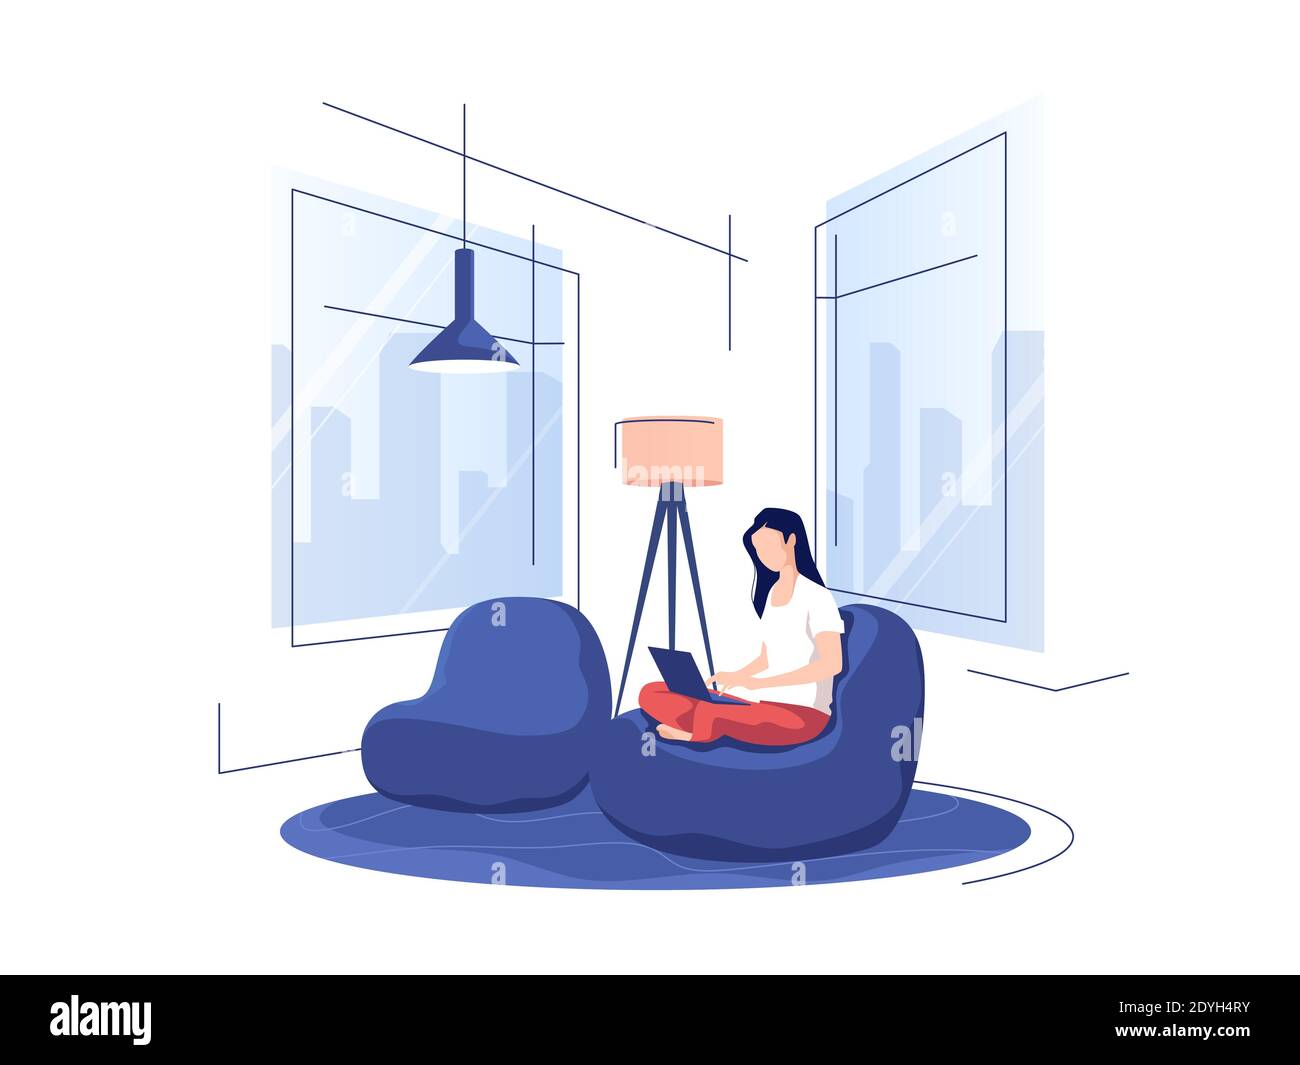 Vector illustration depicting a young girl in a modern interior using a laptop while sitting in a home chair Stock Vector